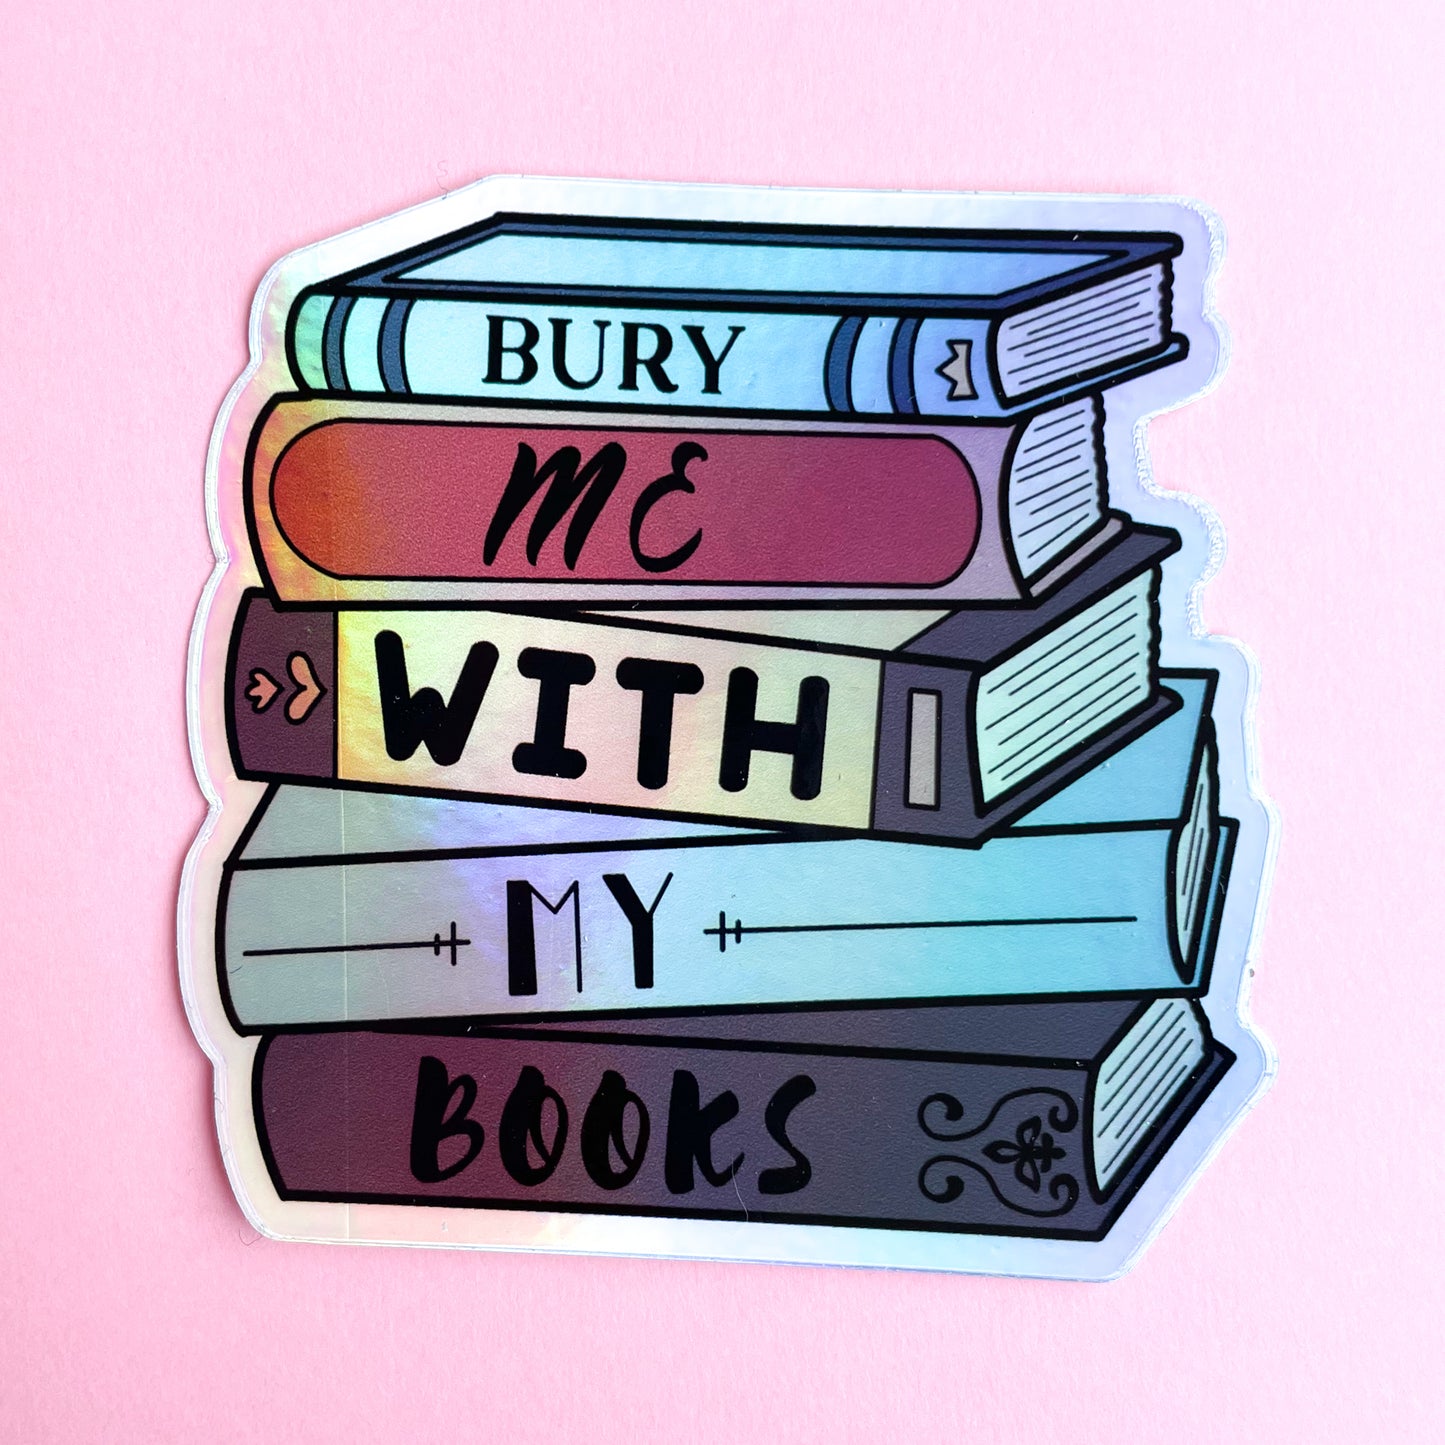 A sticker shaped like a stack of books that reads "Bury me with my books" on a pink background.